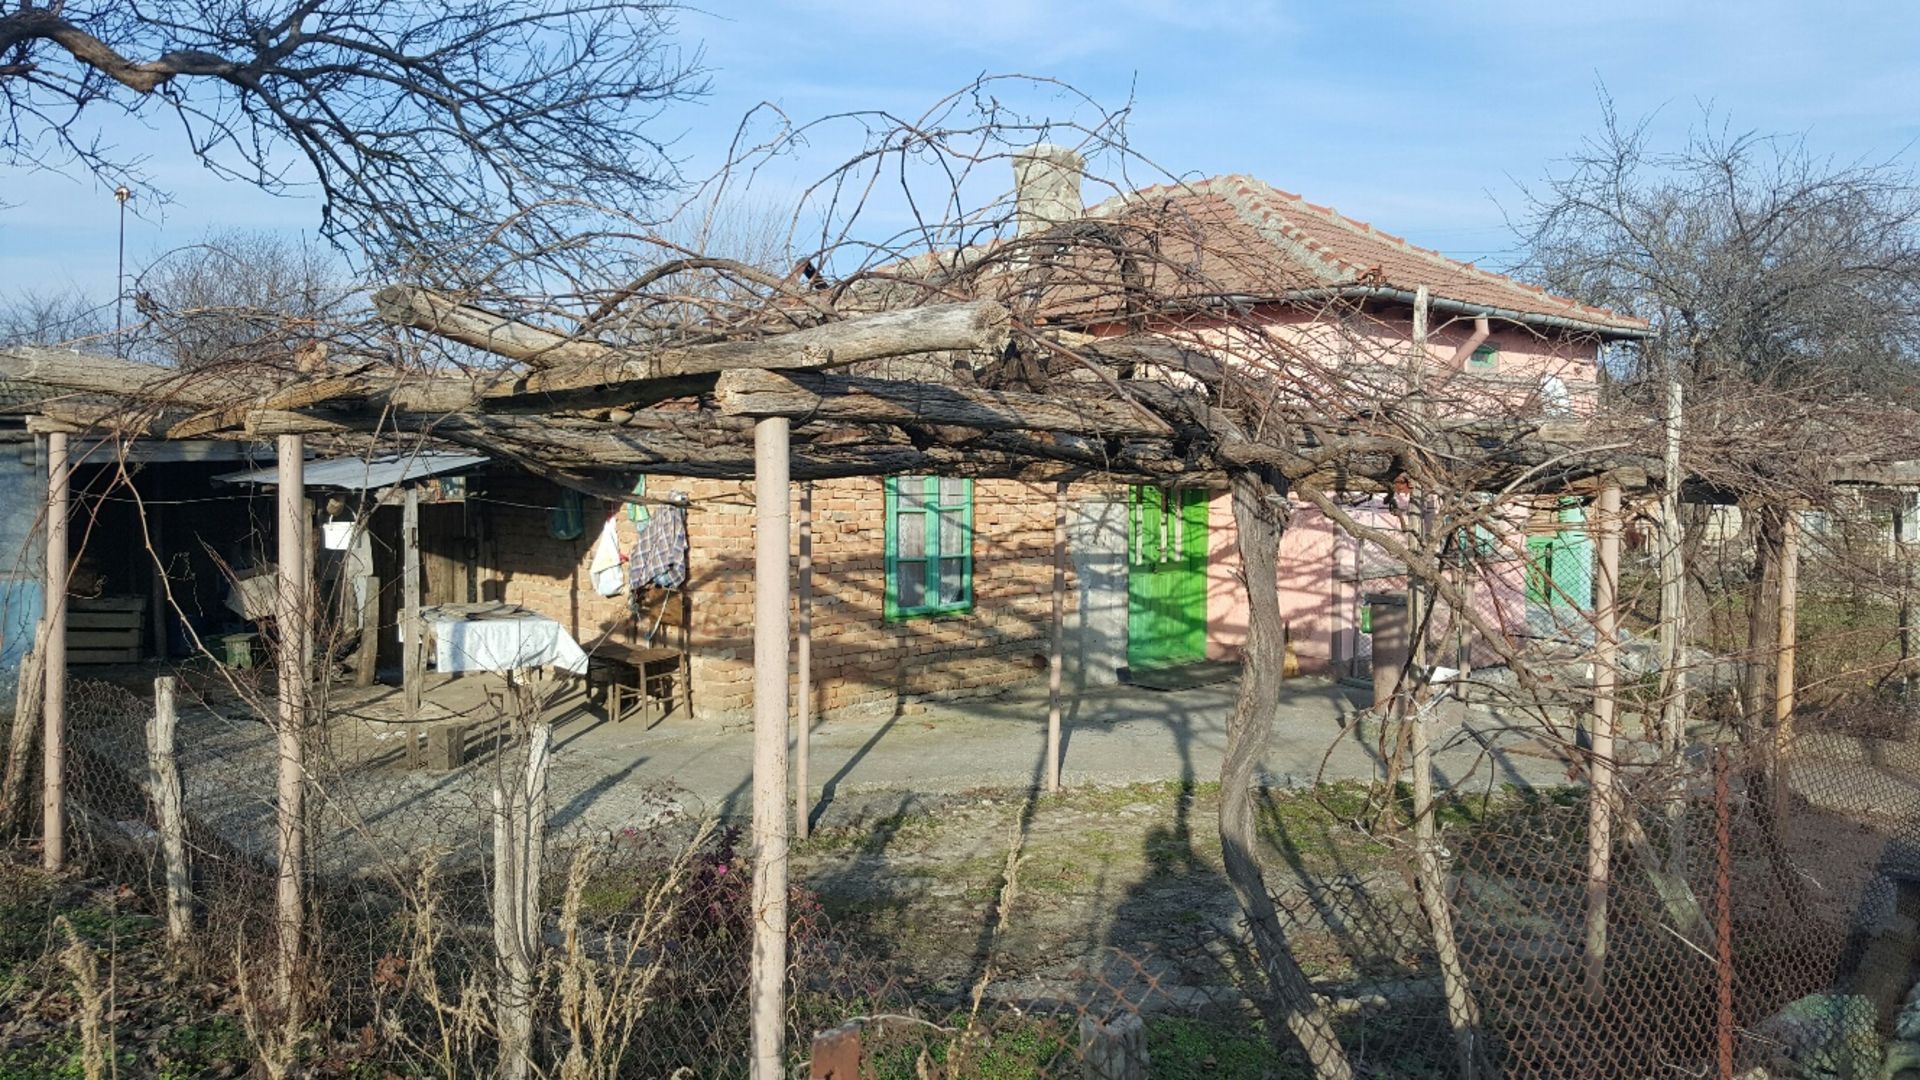 7 ROOM BULGARIAN COTTAGE IN IZVOROVO FOR SALE. WITH LAND NOT FAR FROM COAST - Image 5 of 41